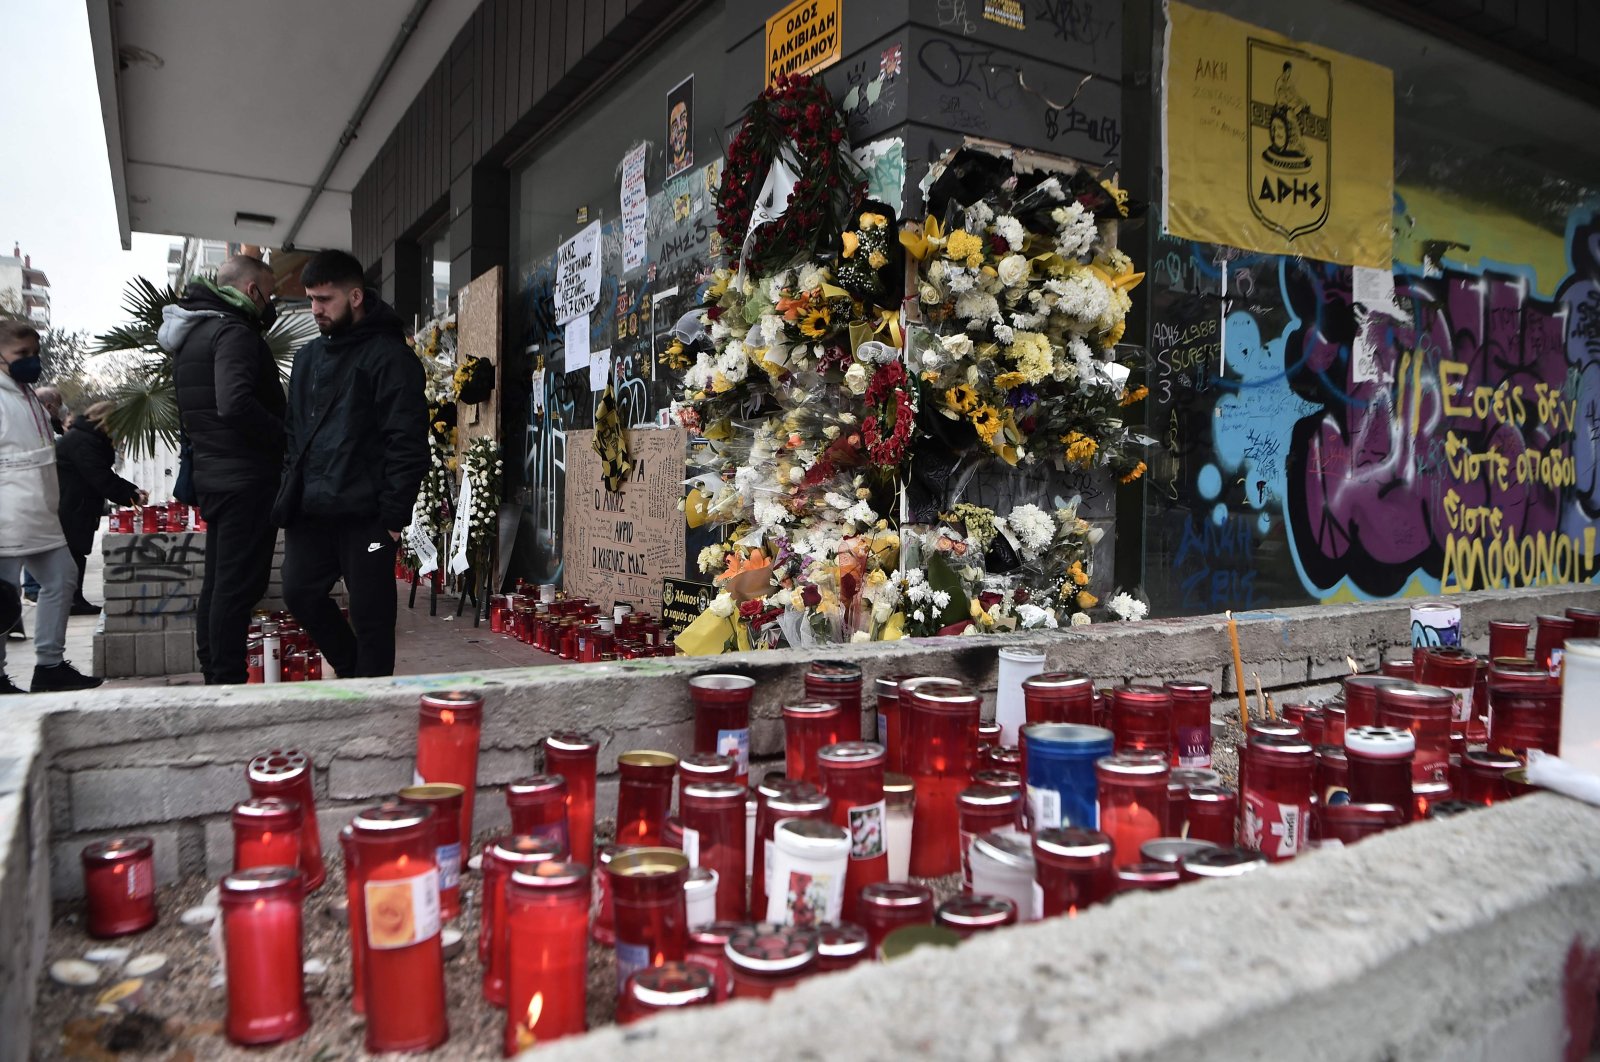 People stand at the spot where a teenager was stabbed to death outside the Aris FC stadium, Thessaloniki, Greece, Feb. 7, 2022. (AFP Photo)